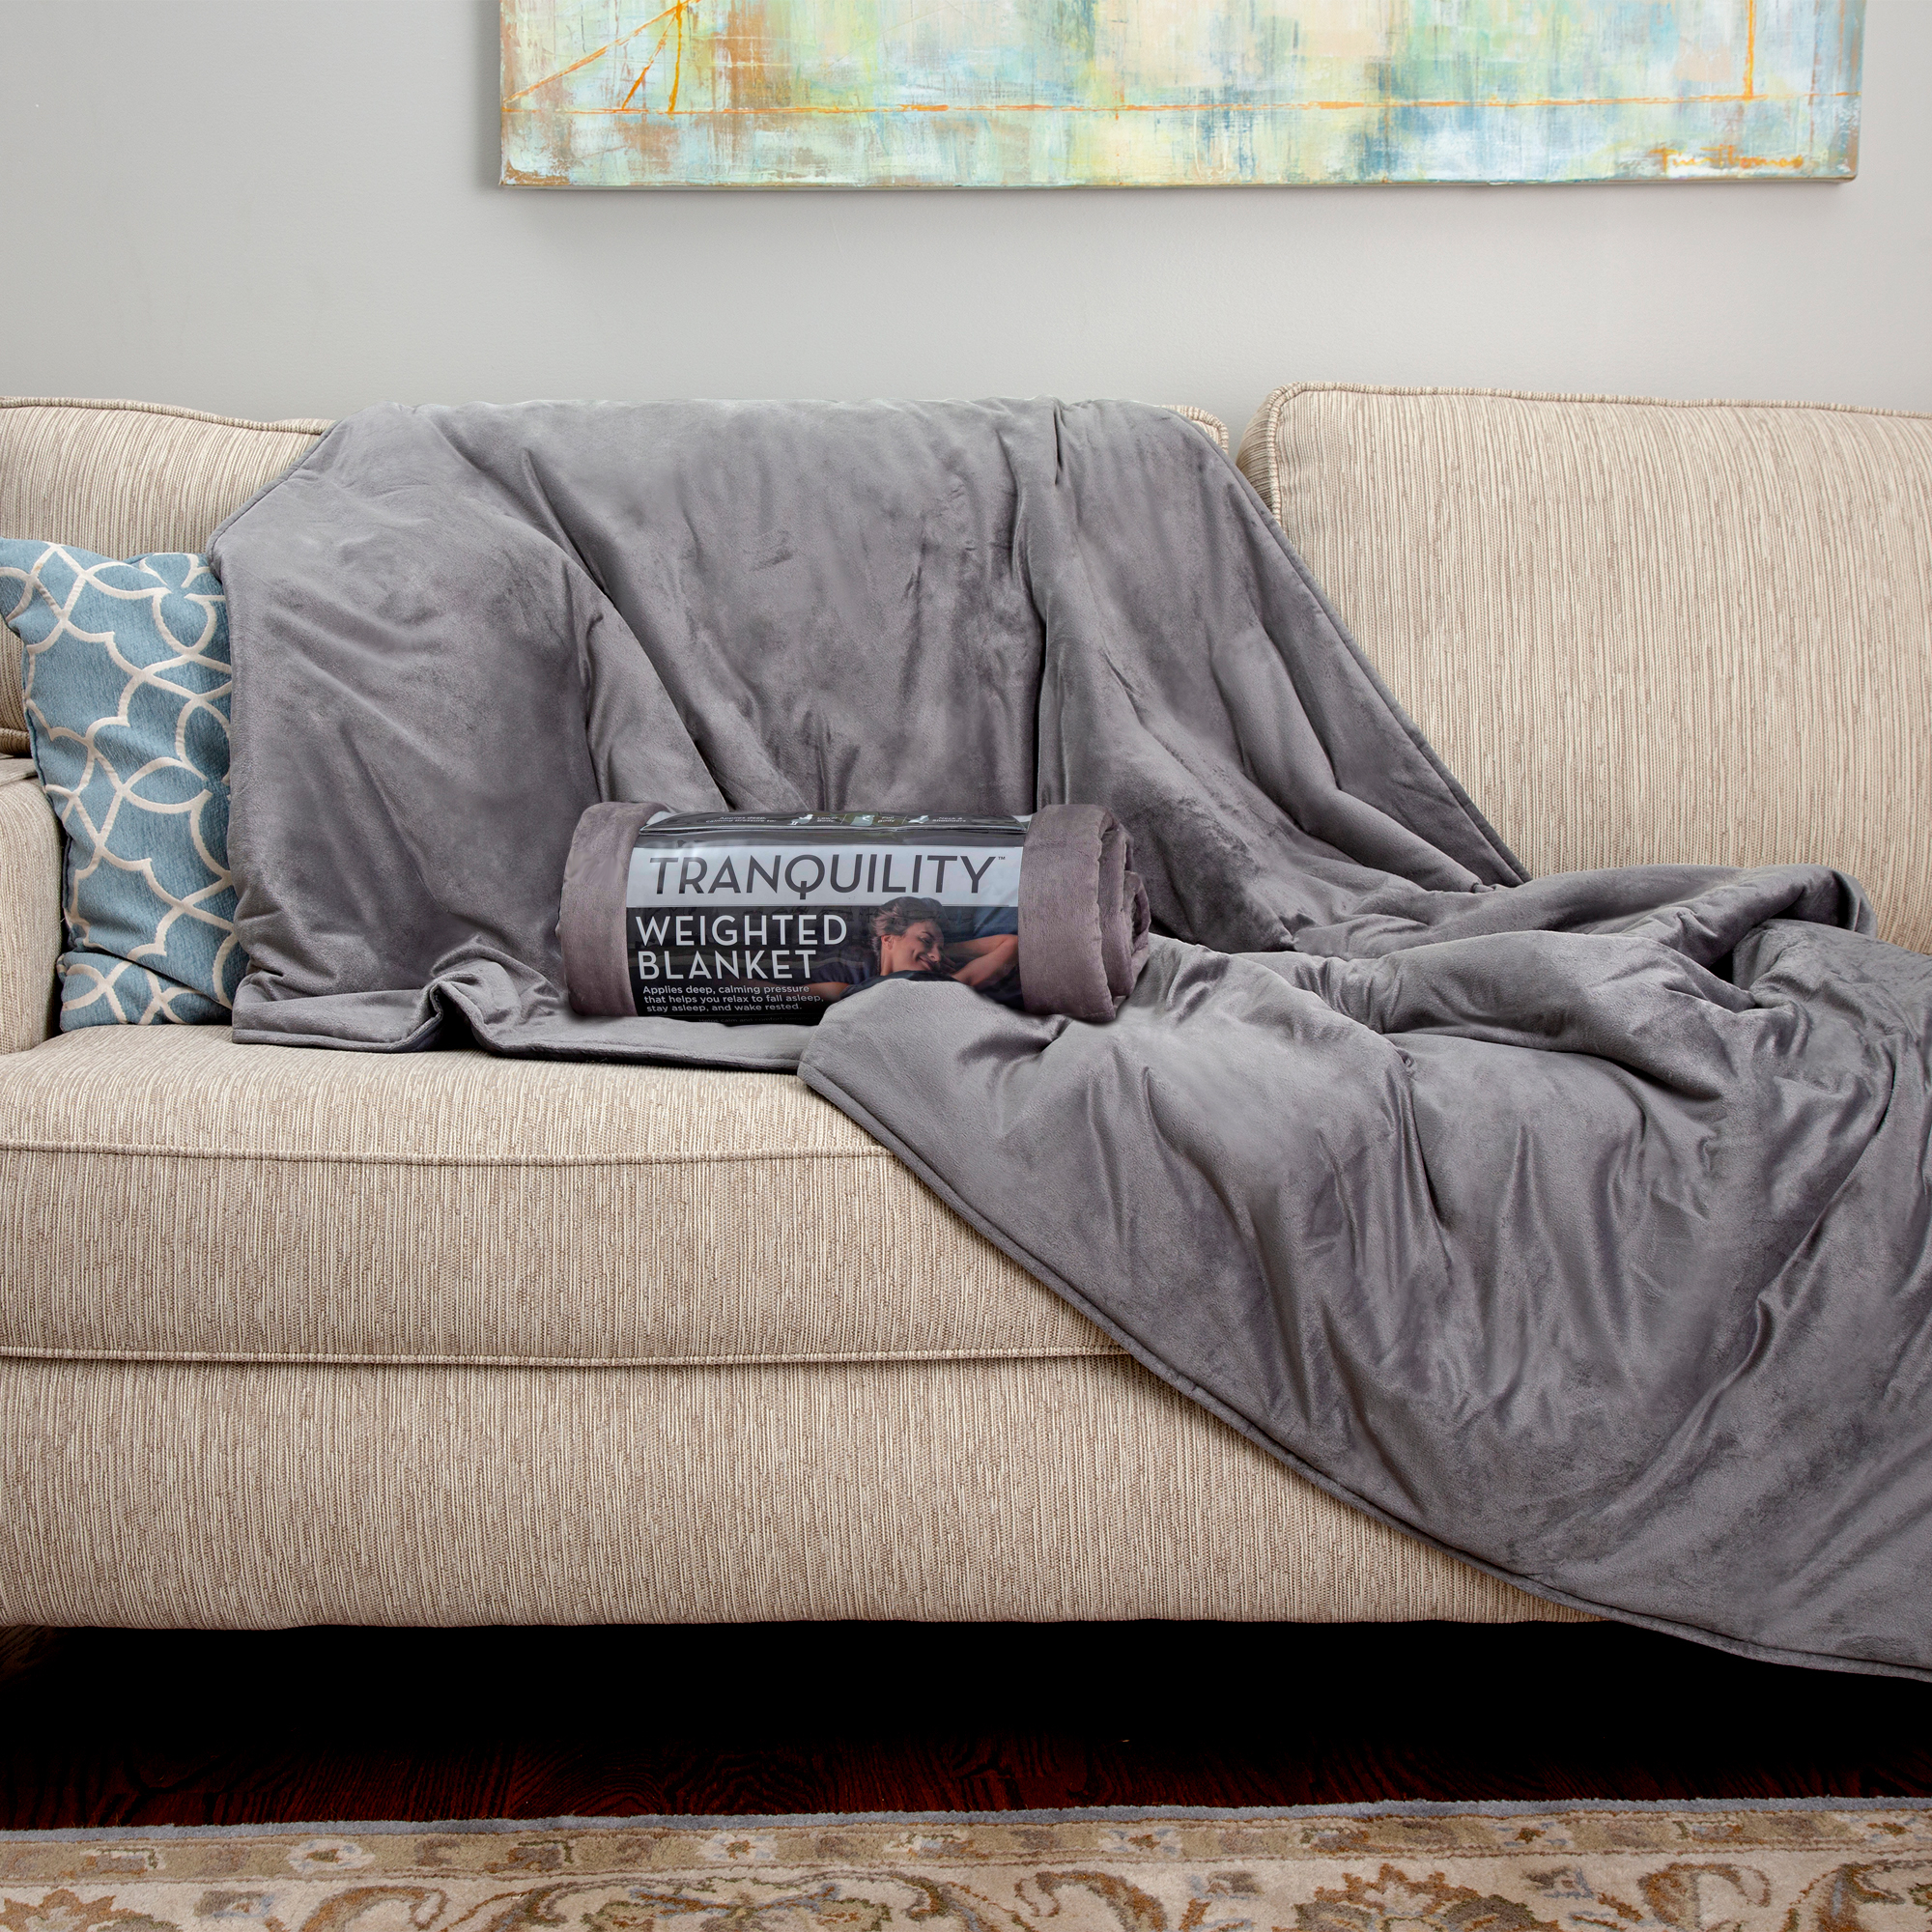 Tranquility, Antimicrobial, Temperature Balancing, Weighted Blanket with Washable Cover, 12 lbs - image 3 of 10